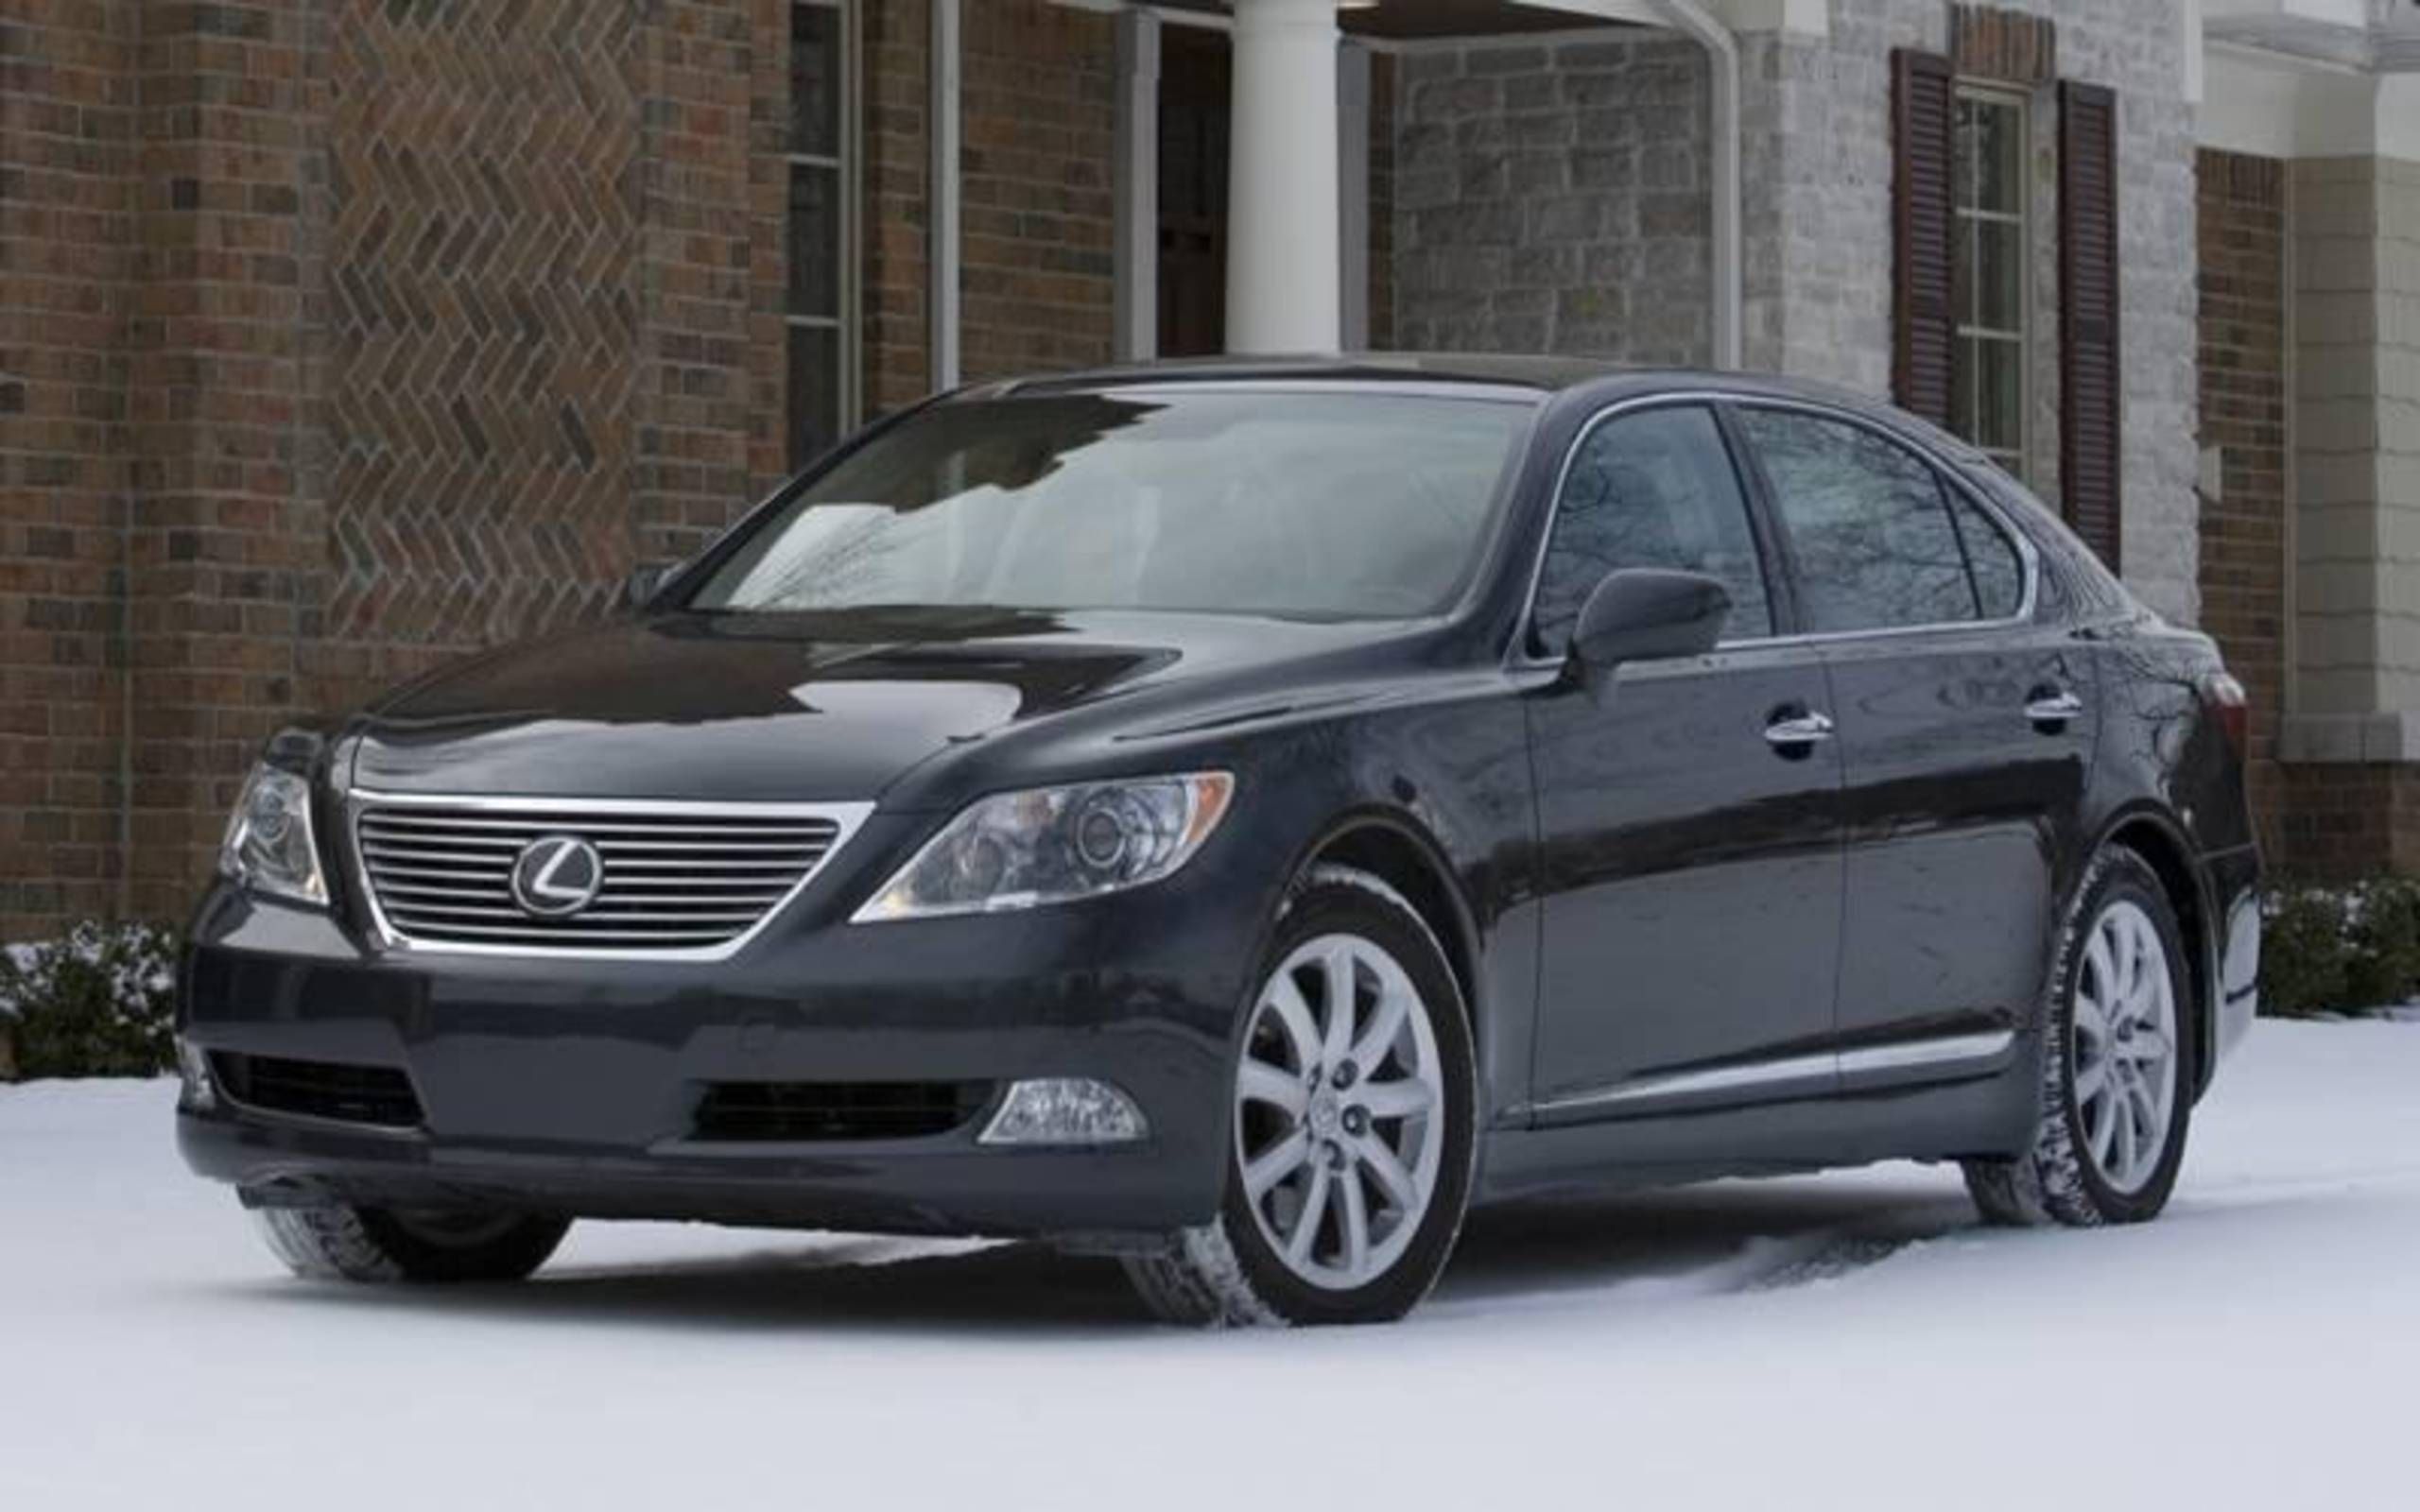 How Many Miles Will a Lexus Ls 460 Last 